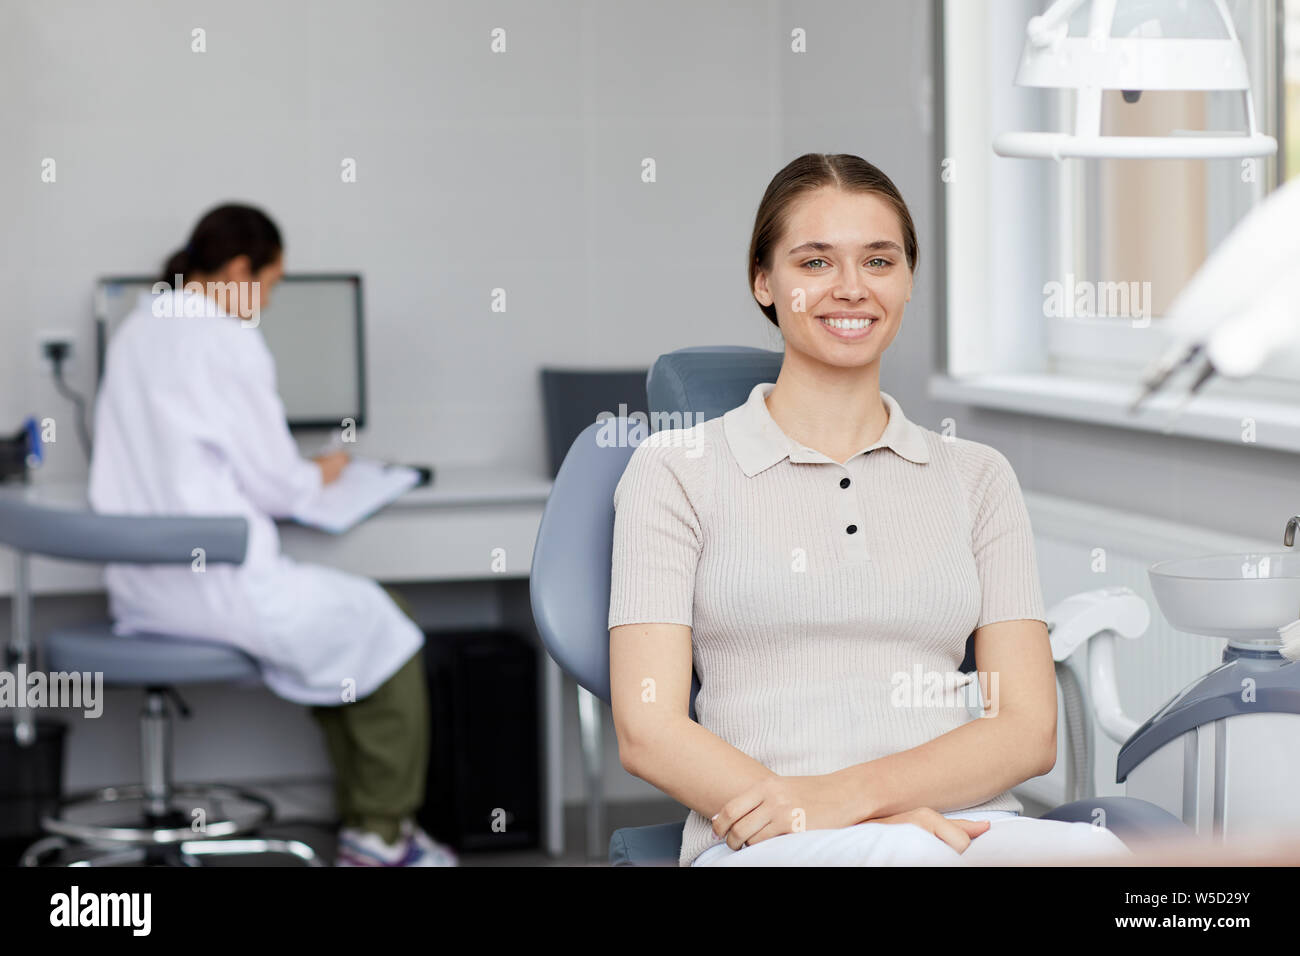 Portrait of pretty young woman smiling at camera and showing perfect white teeth while sitting in dental chair and waiting for appointment, copy space Stock Photo